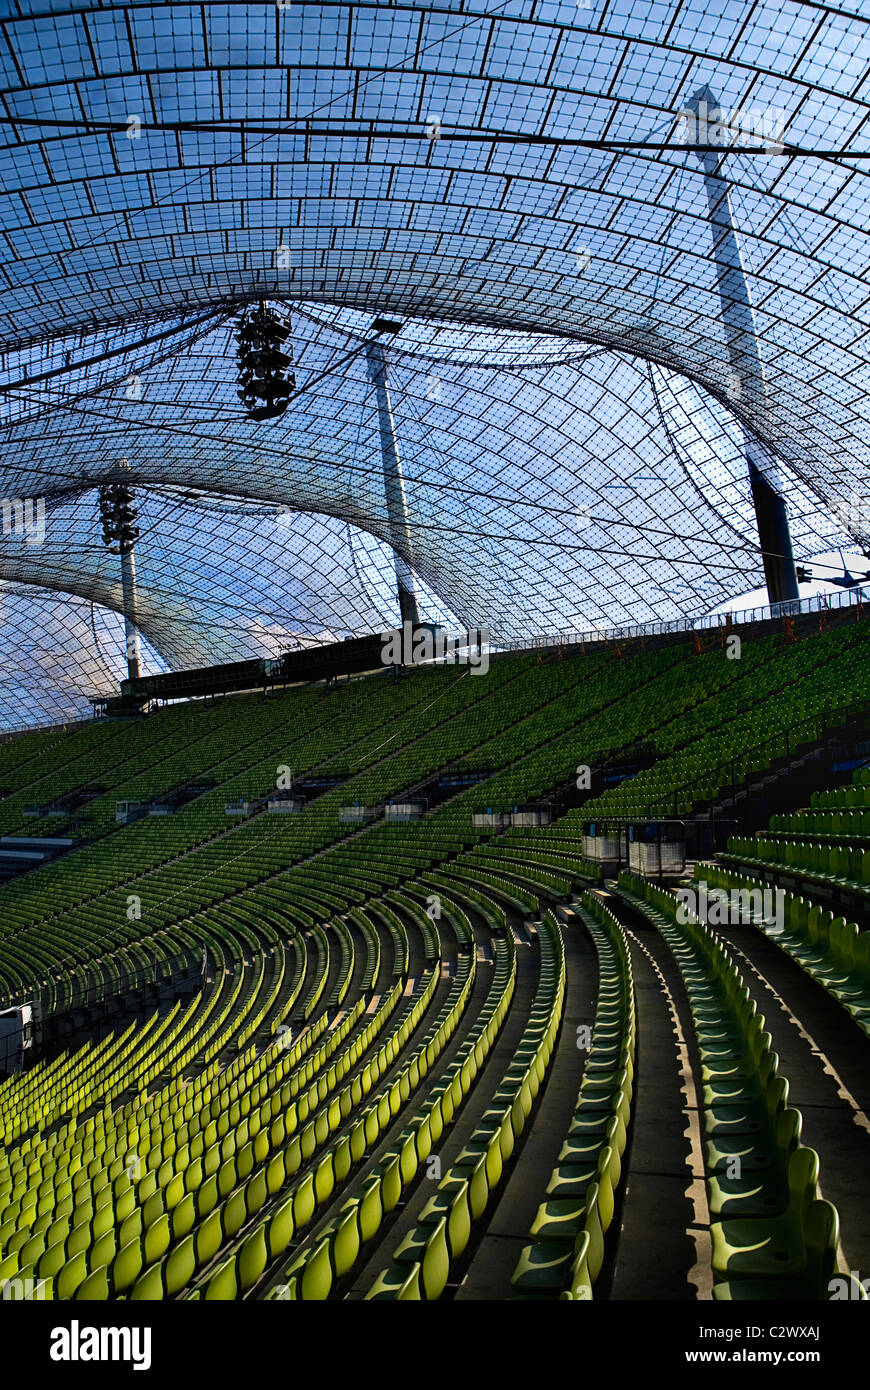 Germany Bavaria Munich 1972 Olympic Stadium curved section of bright green seating under canopies of acrylic glass Stock Photo